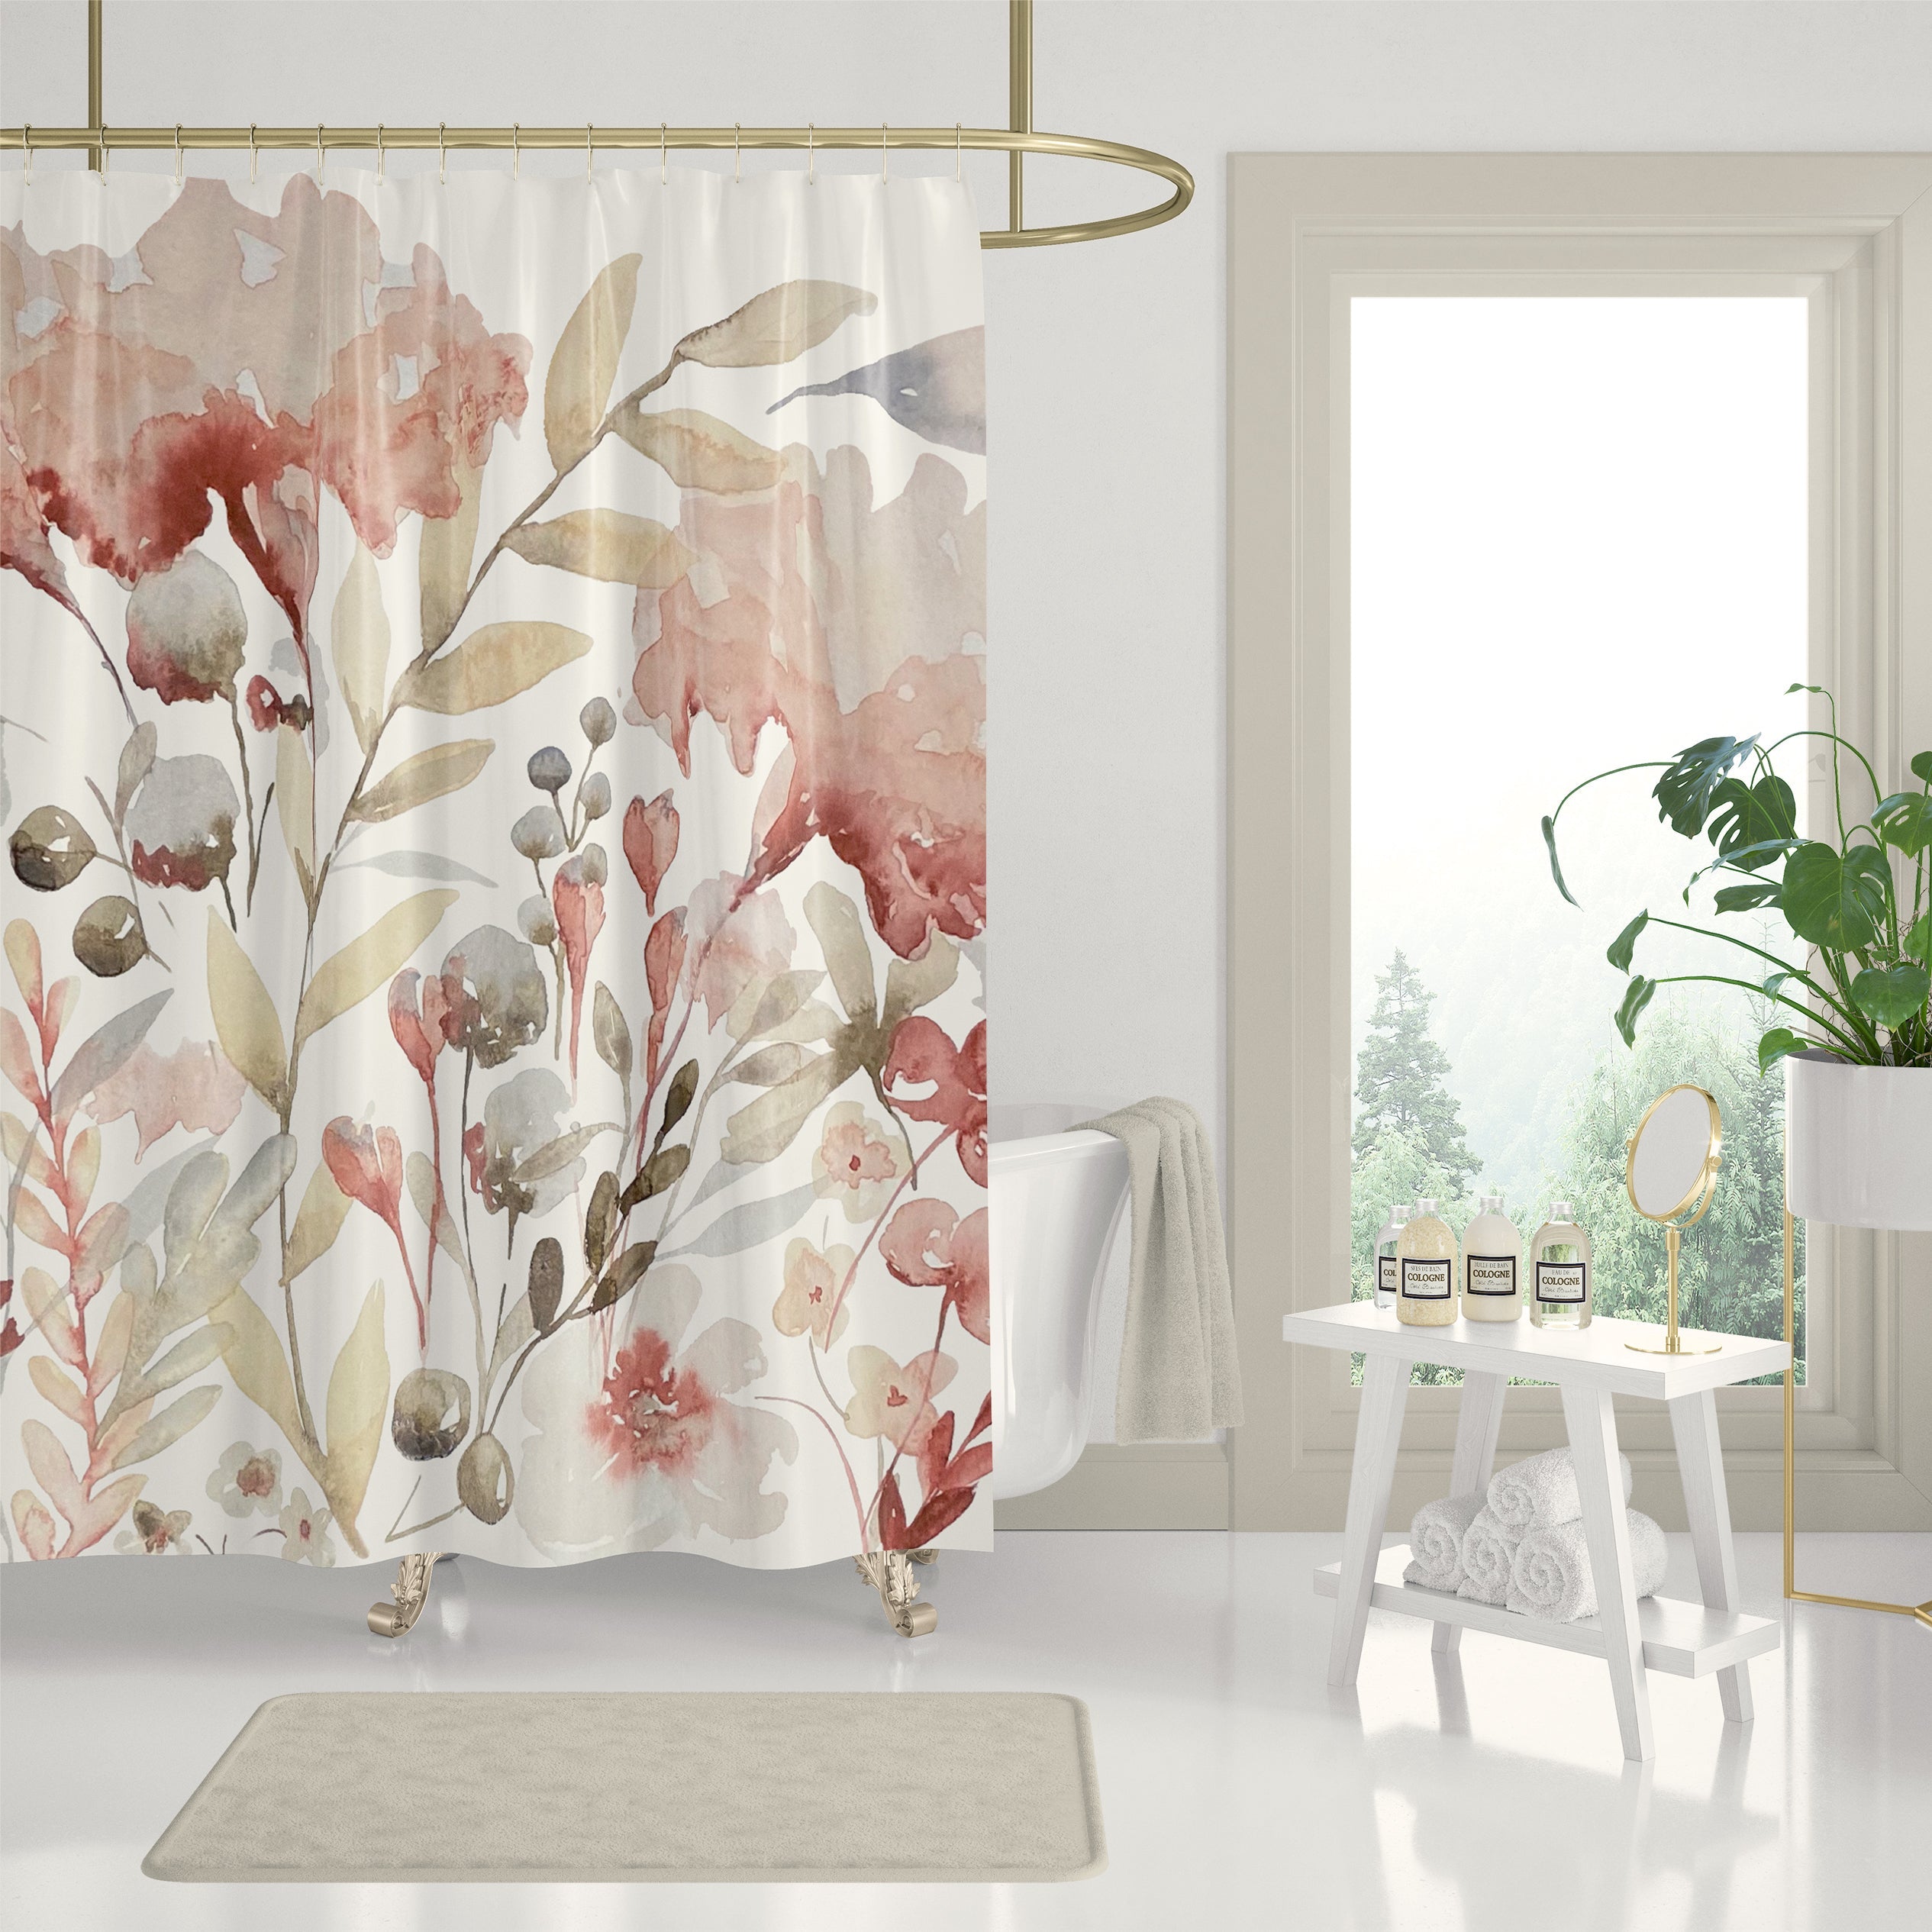 Shower curtains with watercolor art prints